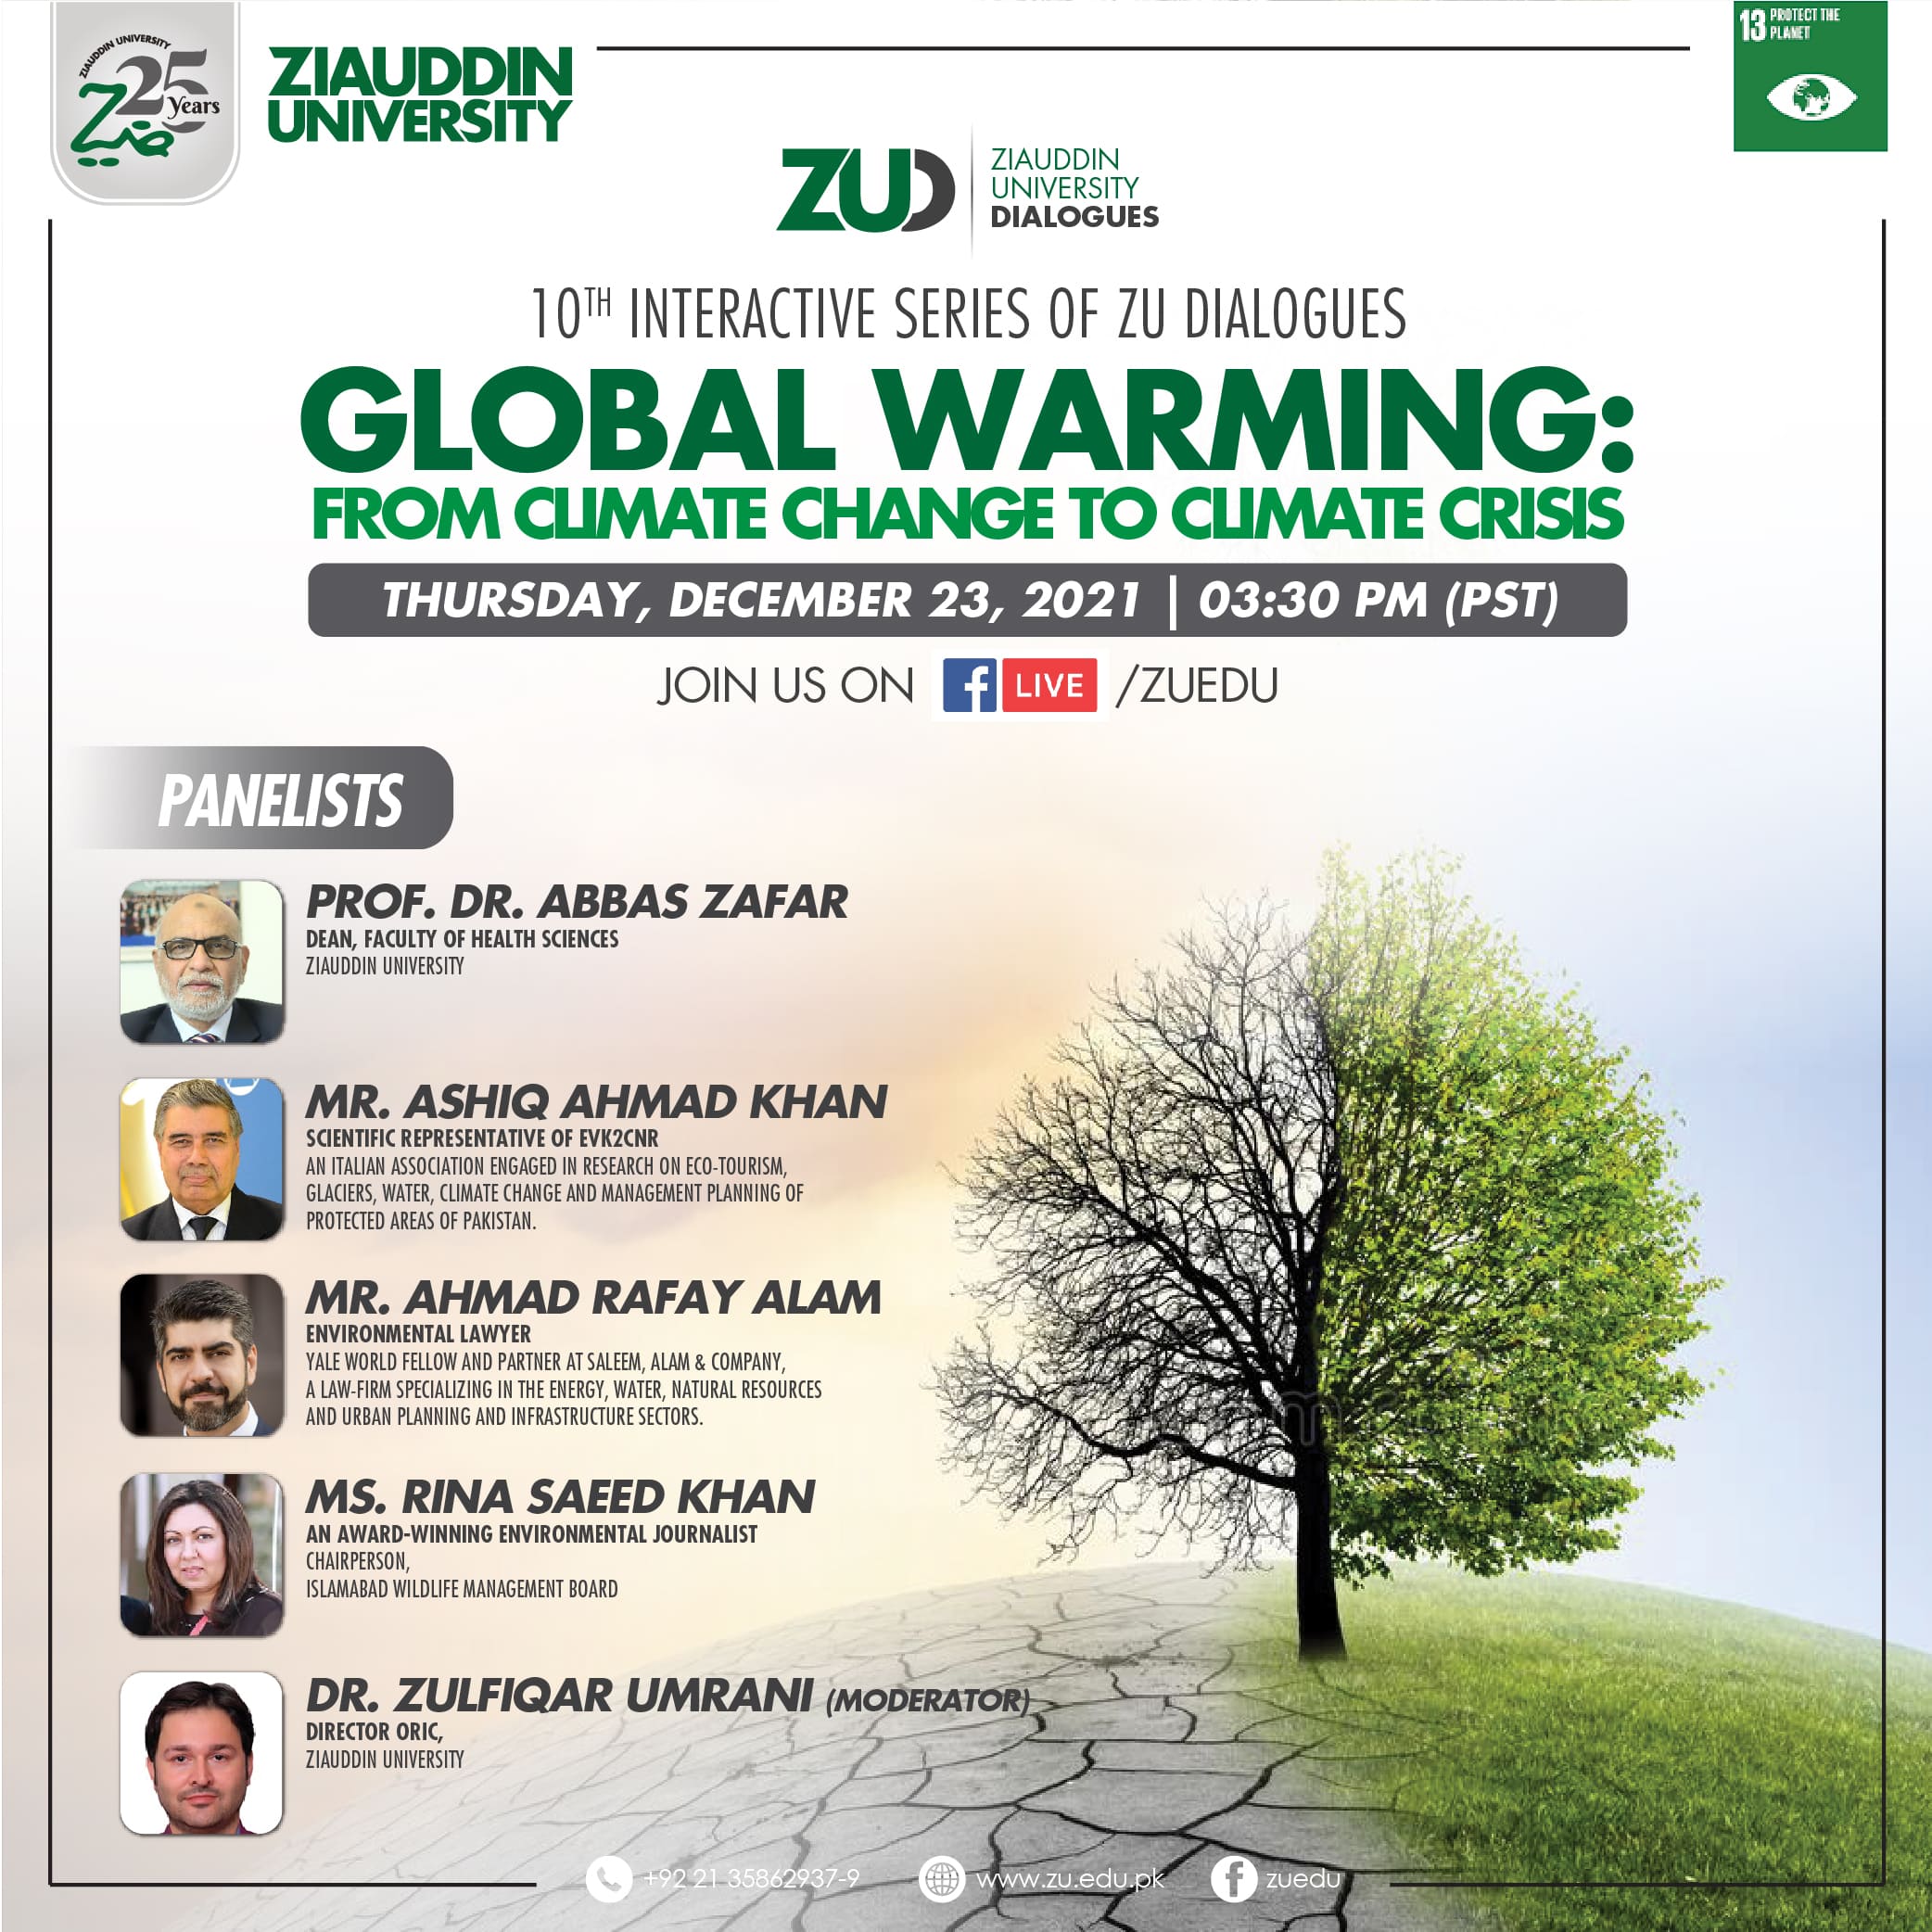 10th Interactive Series ZU Dialogues  “Global Warming: From Climate Change to Climate Crisis”